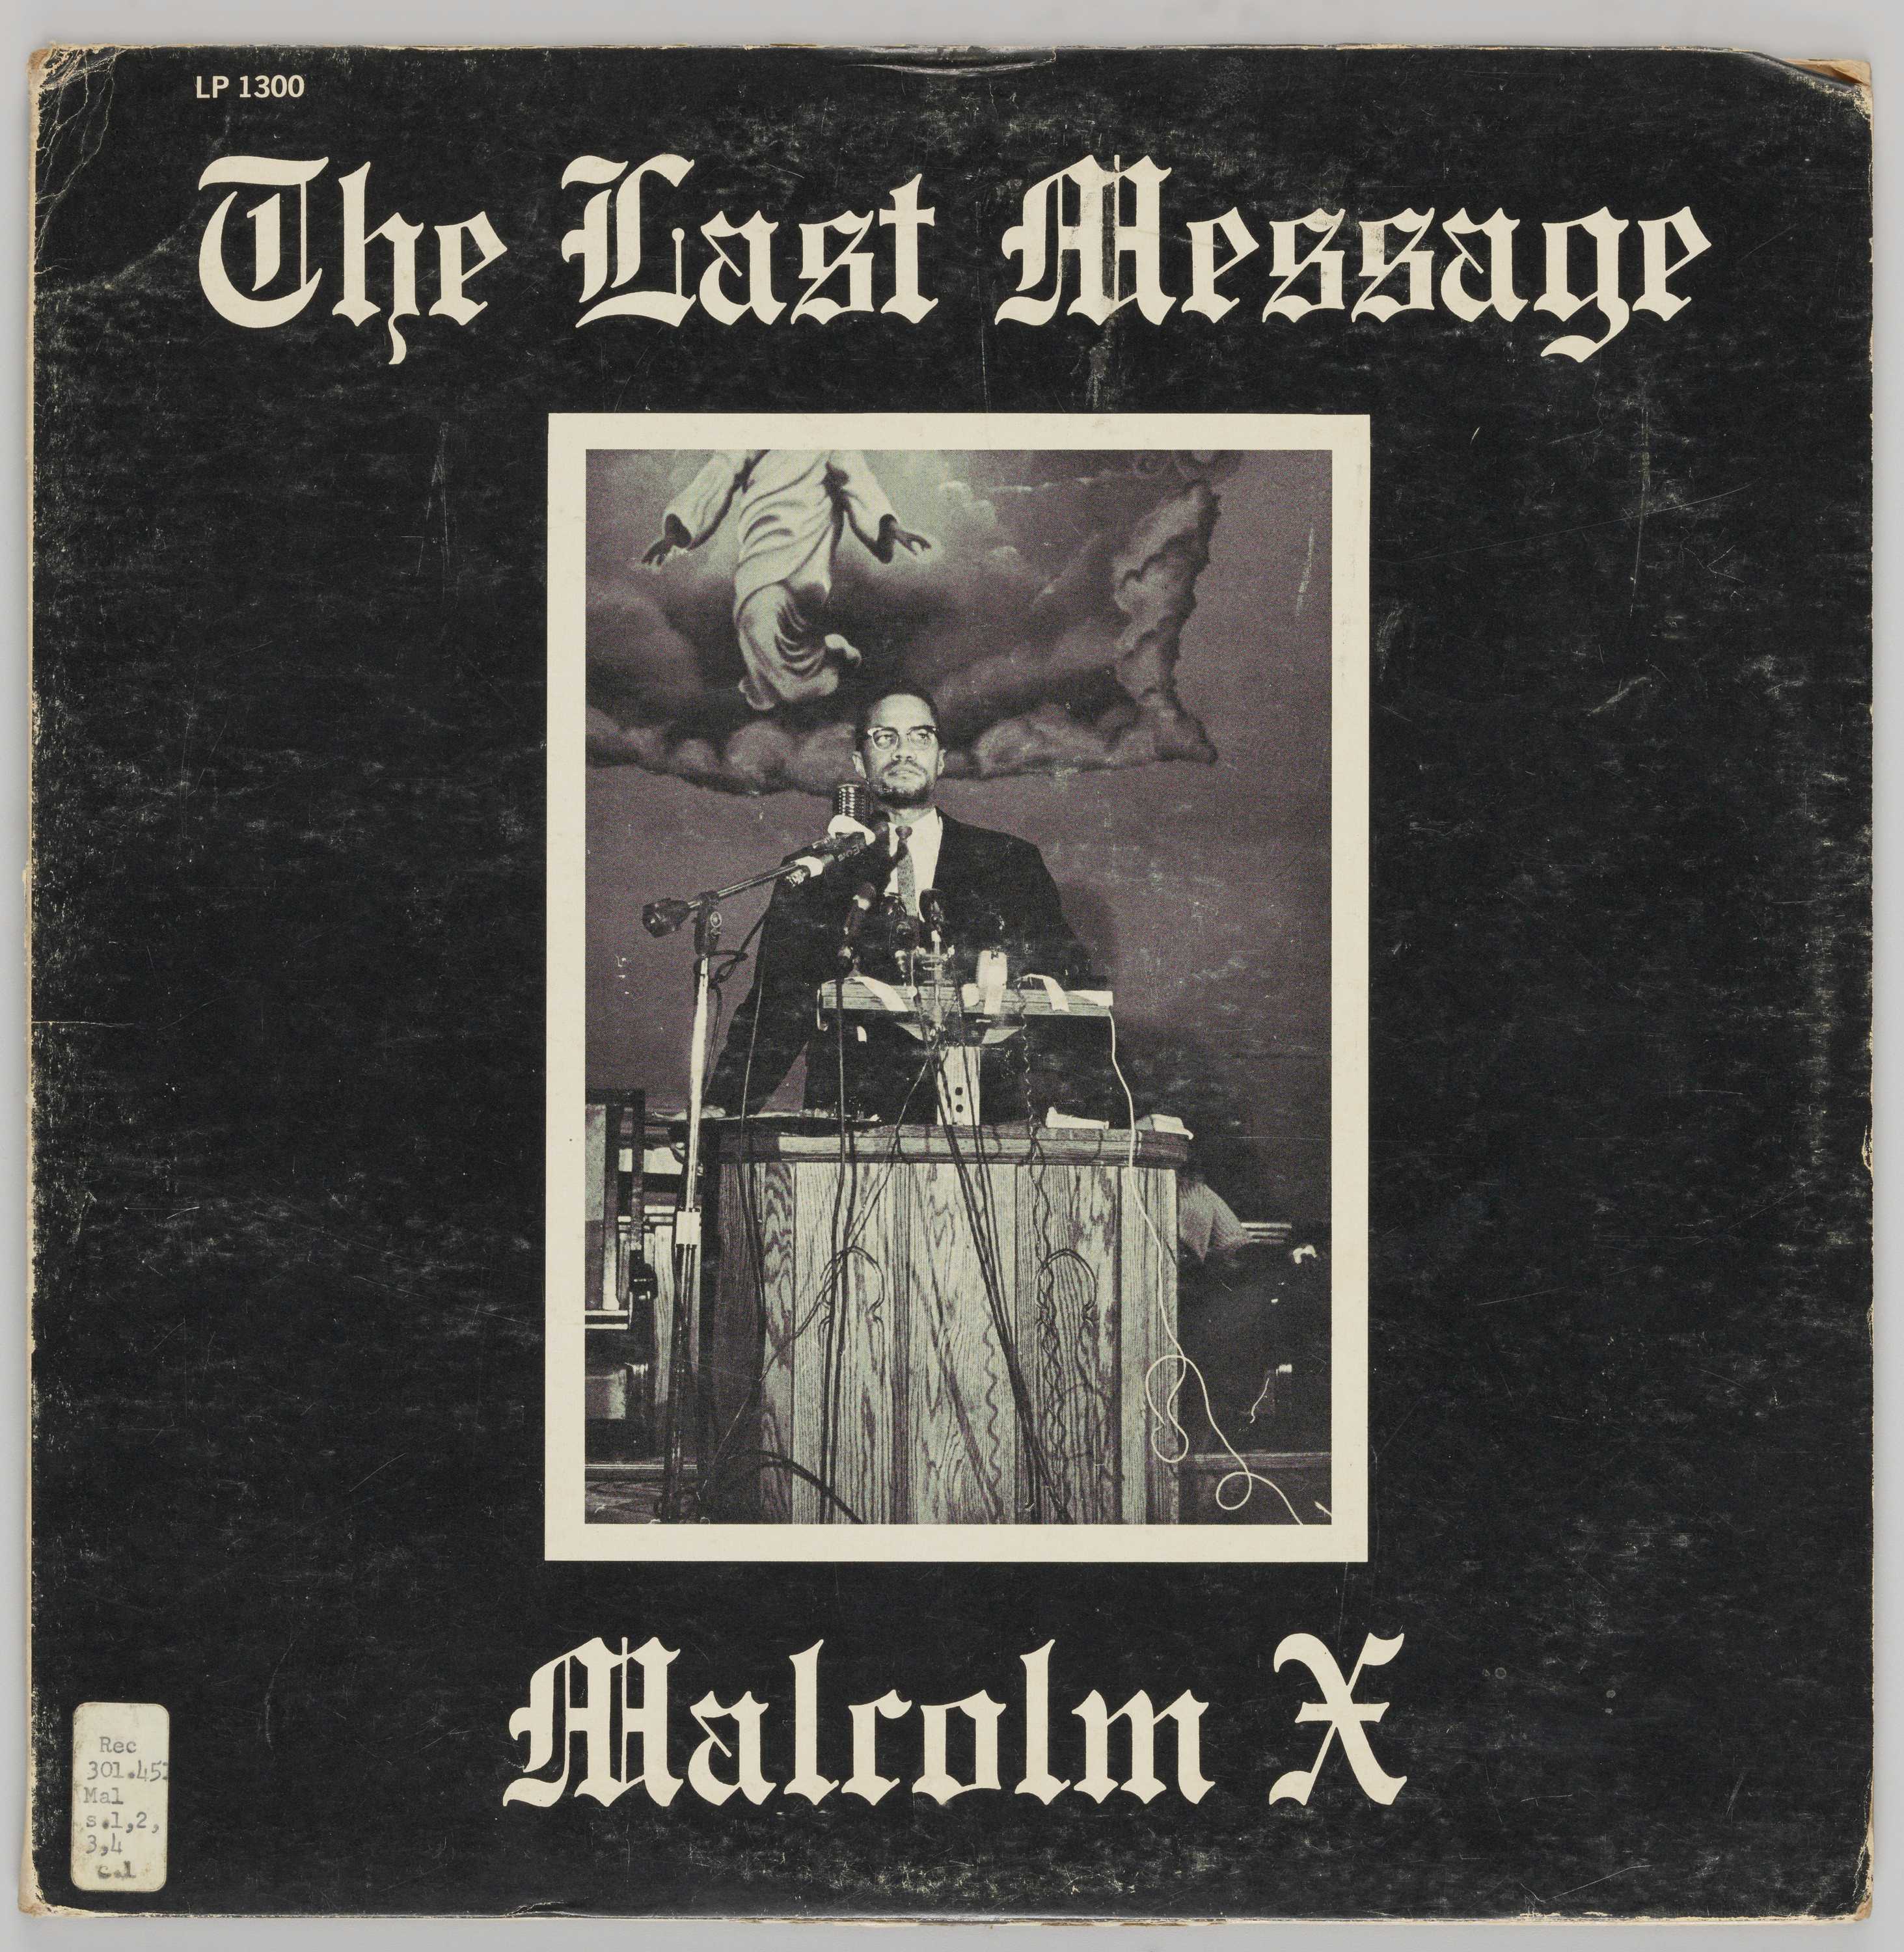 Image of the album jacket for Malcolm X's recording of "The Last Message," featuring an image of Malcolm X standing at a pulpit.